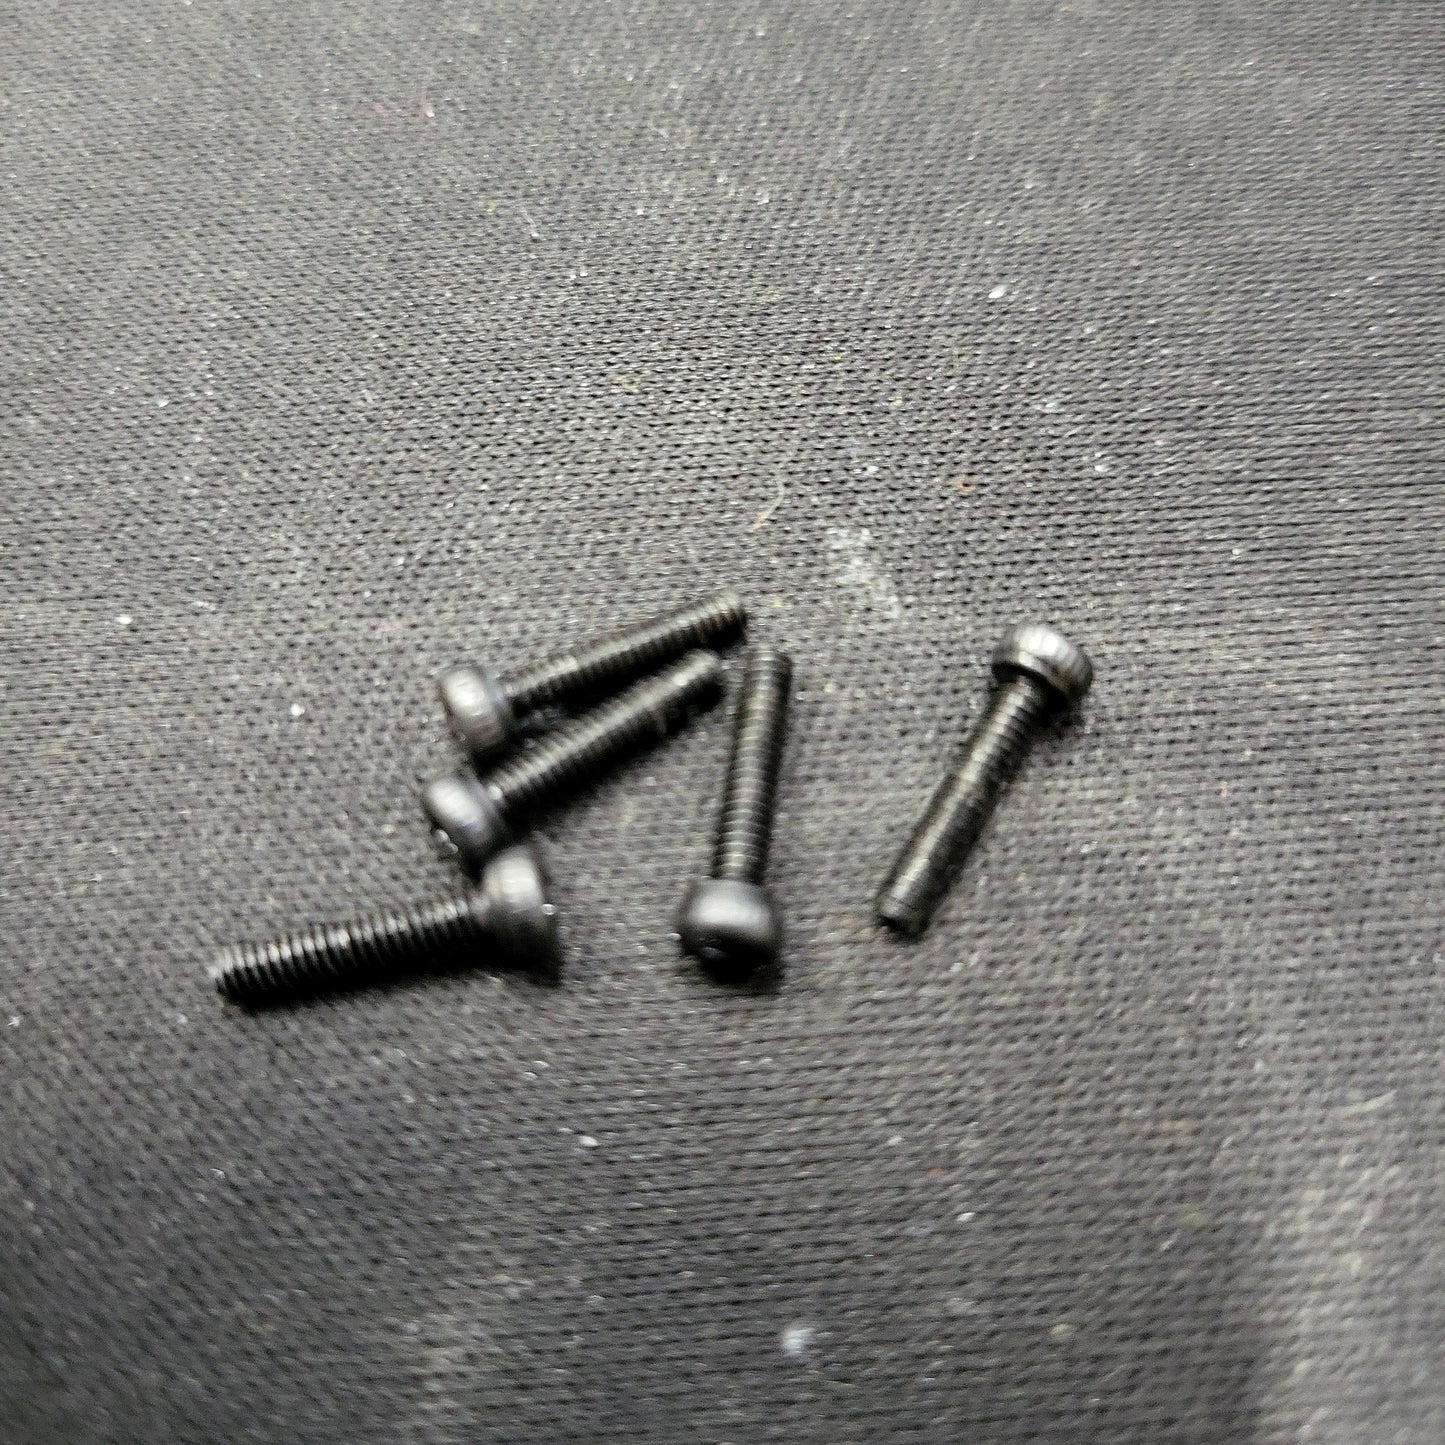 M2 Hardware, Screws / washers for motor mount or other stuff